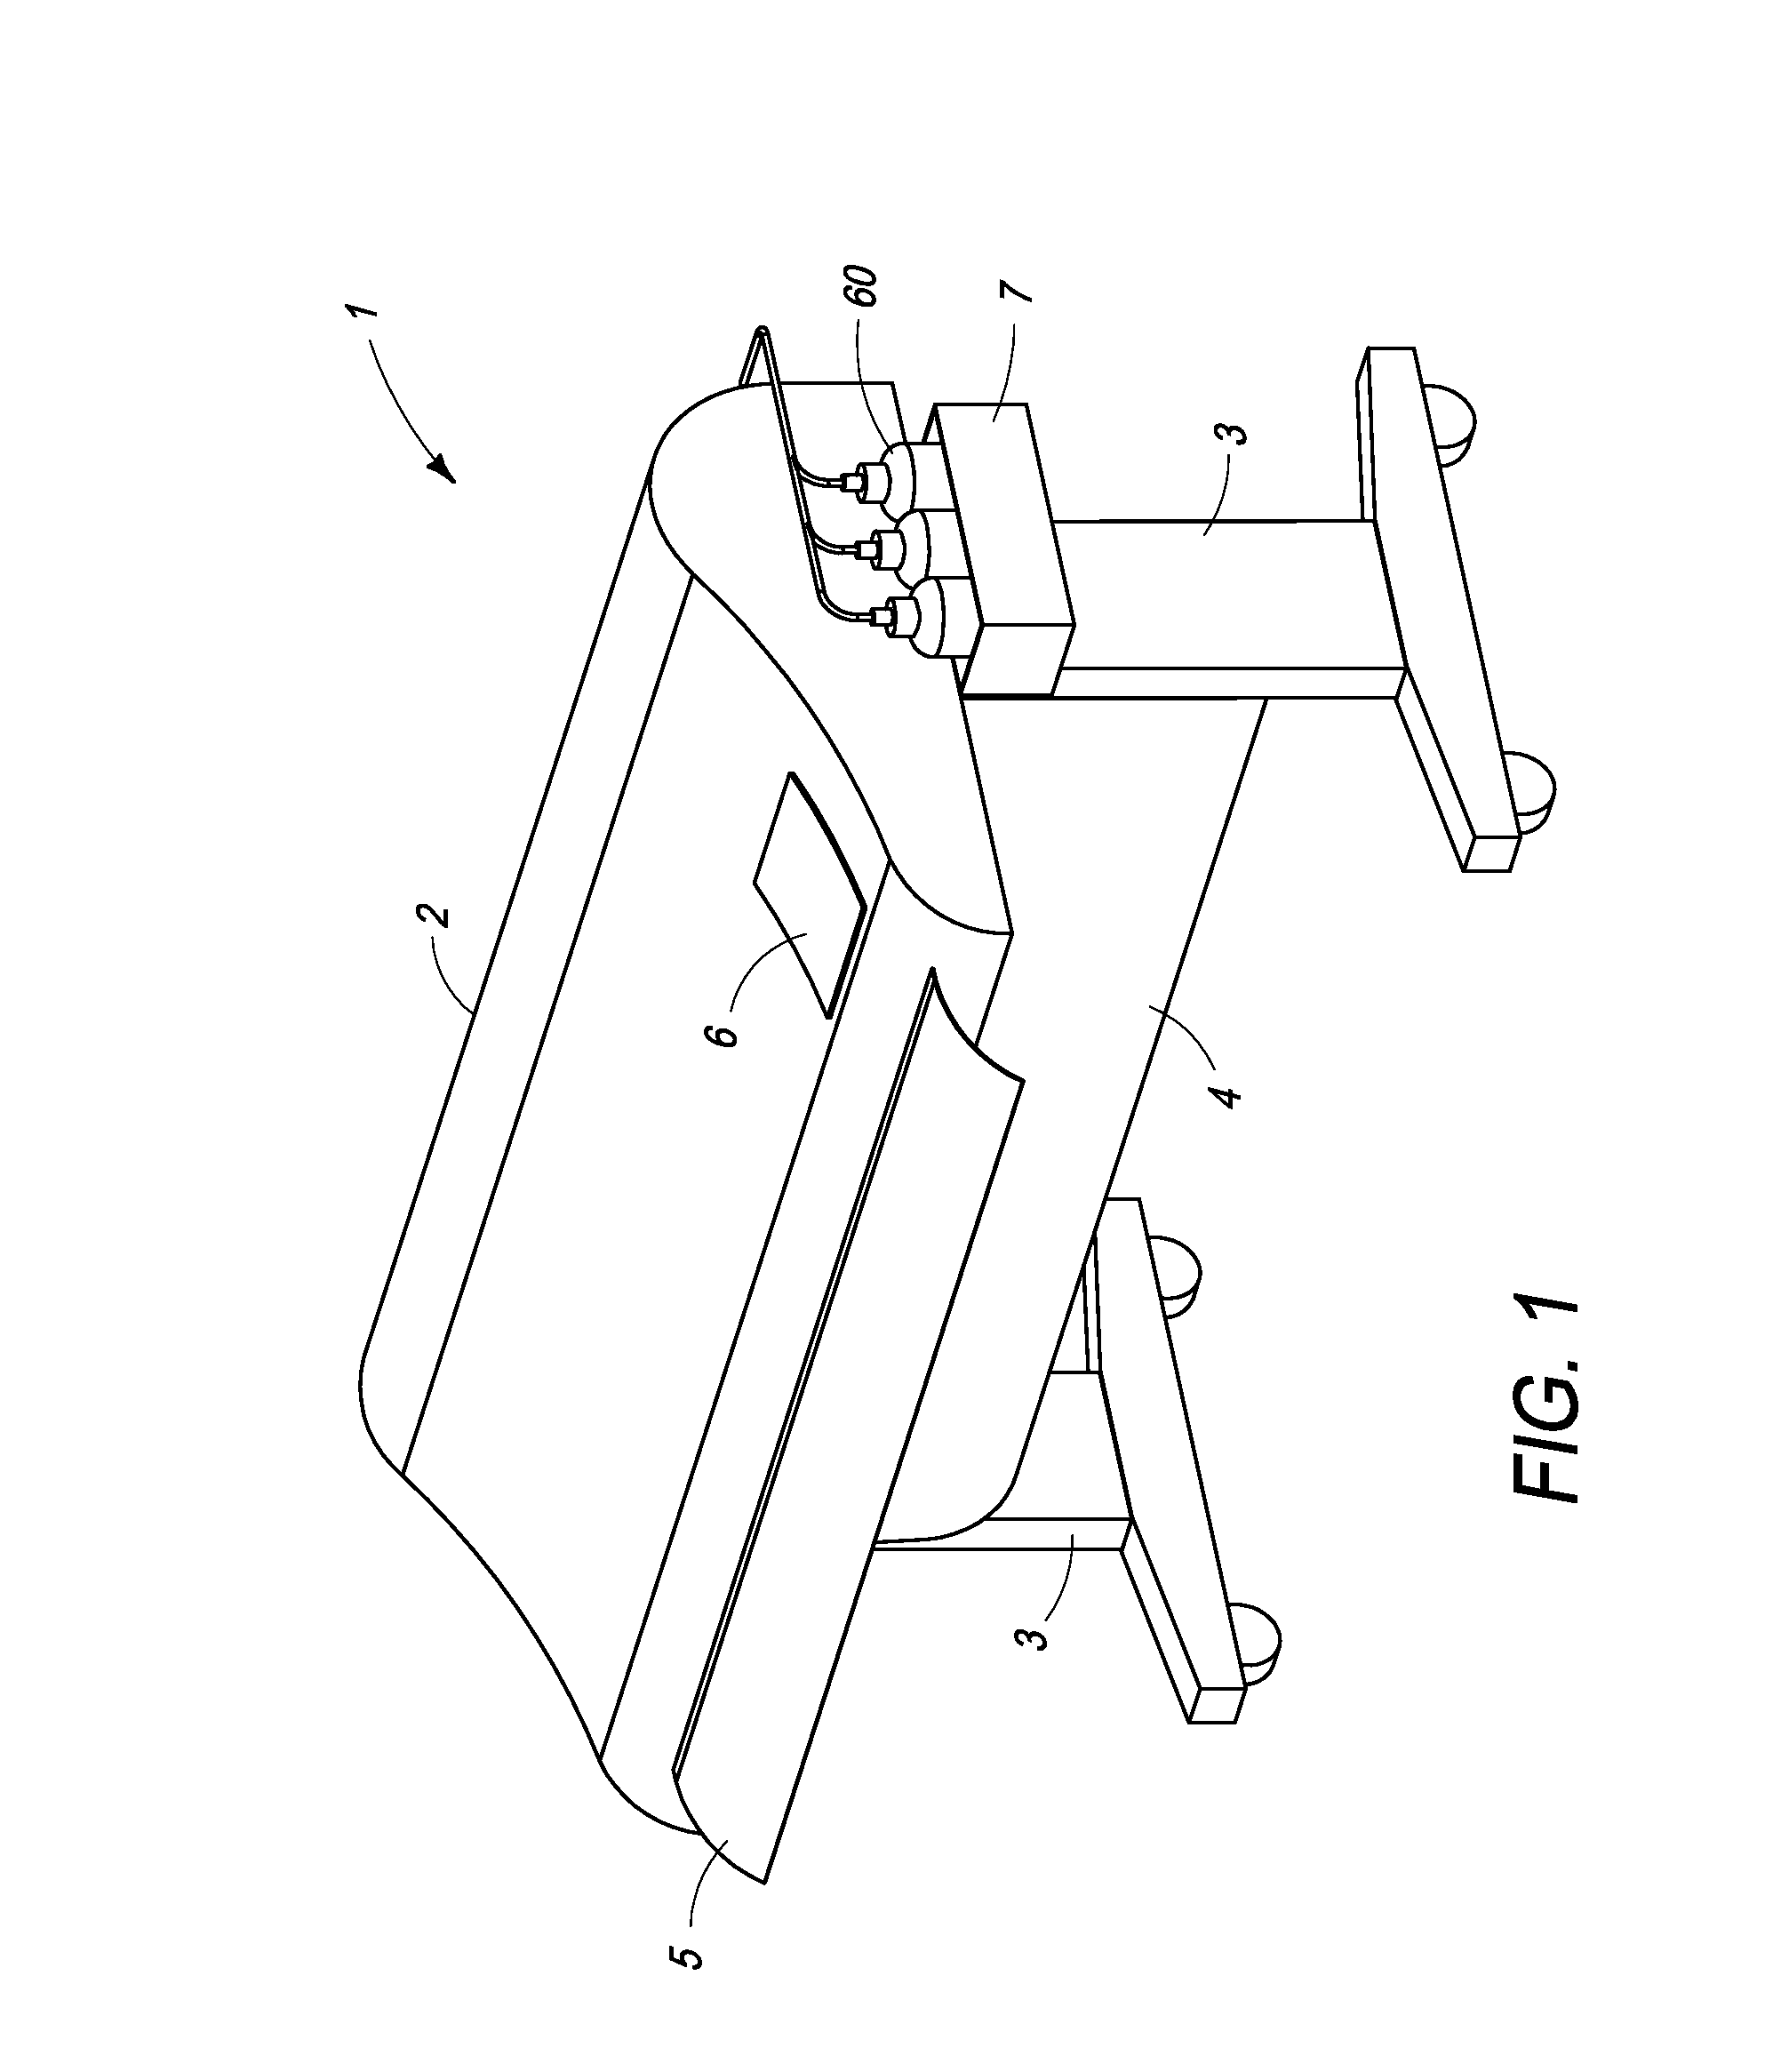 Printer with vacuum belt assembly having non-apertured belts